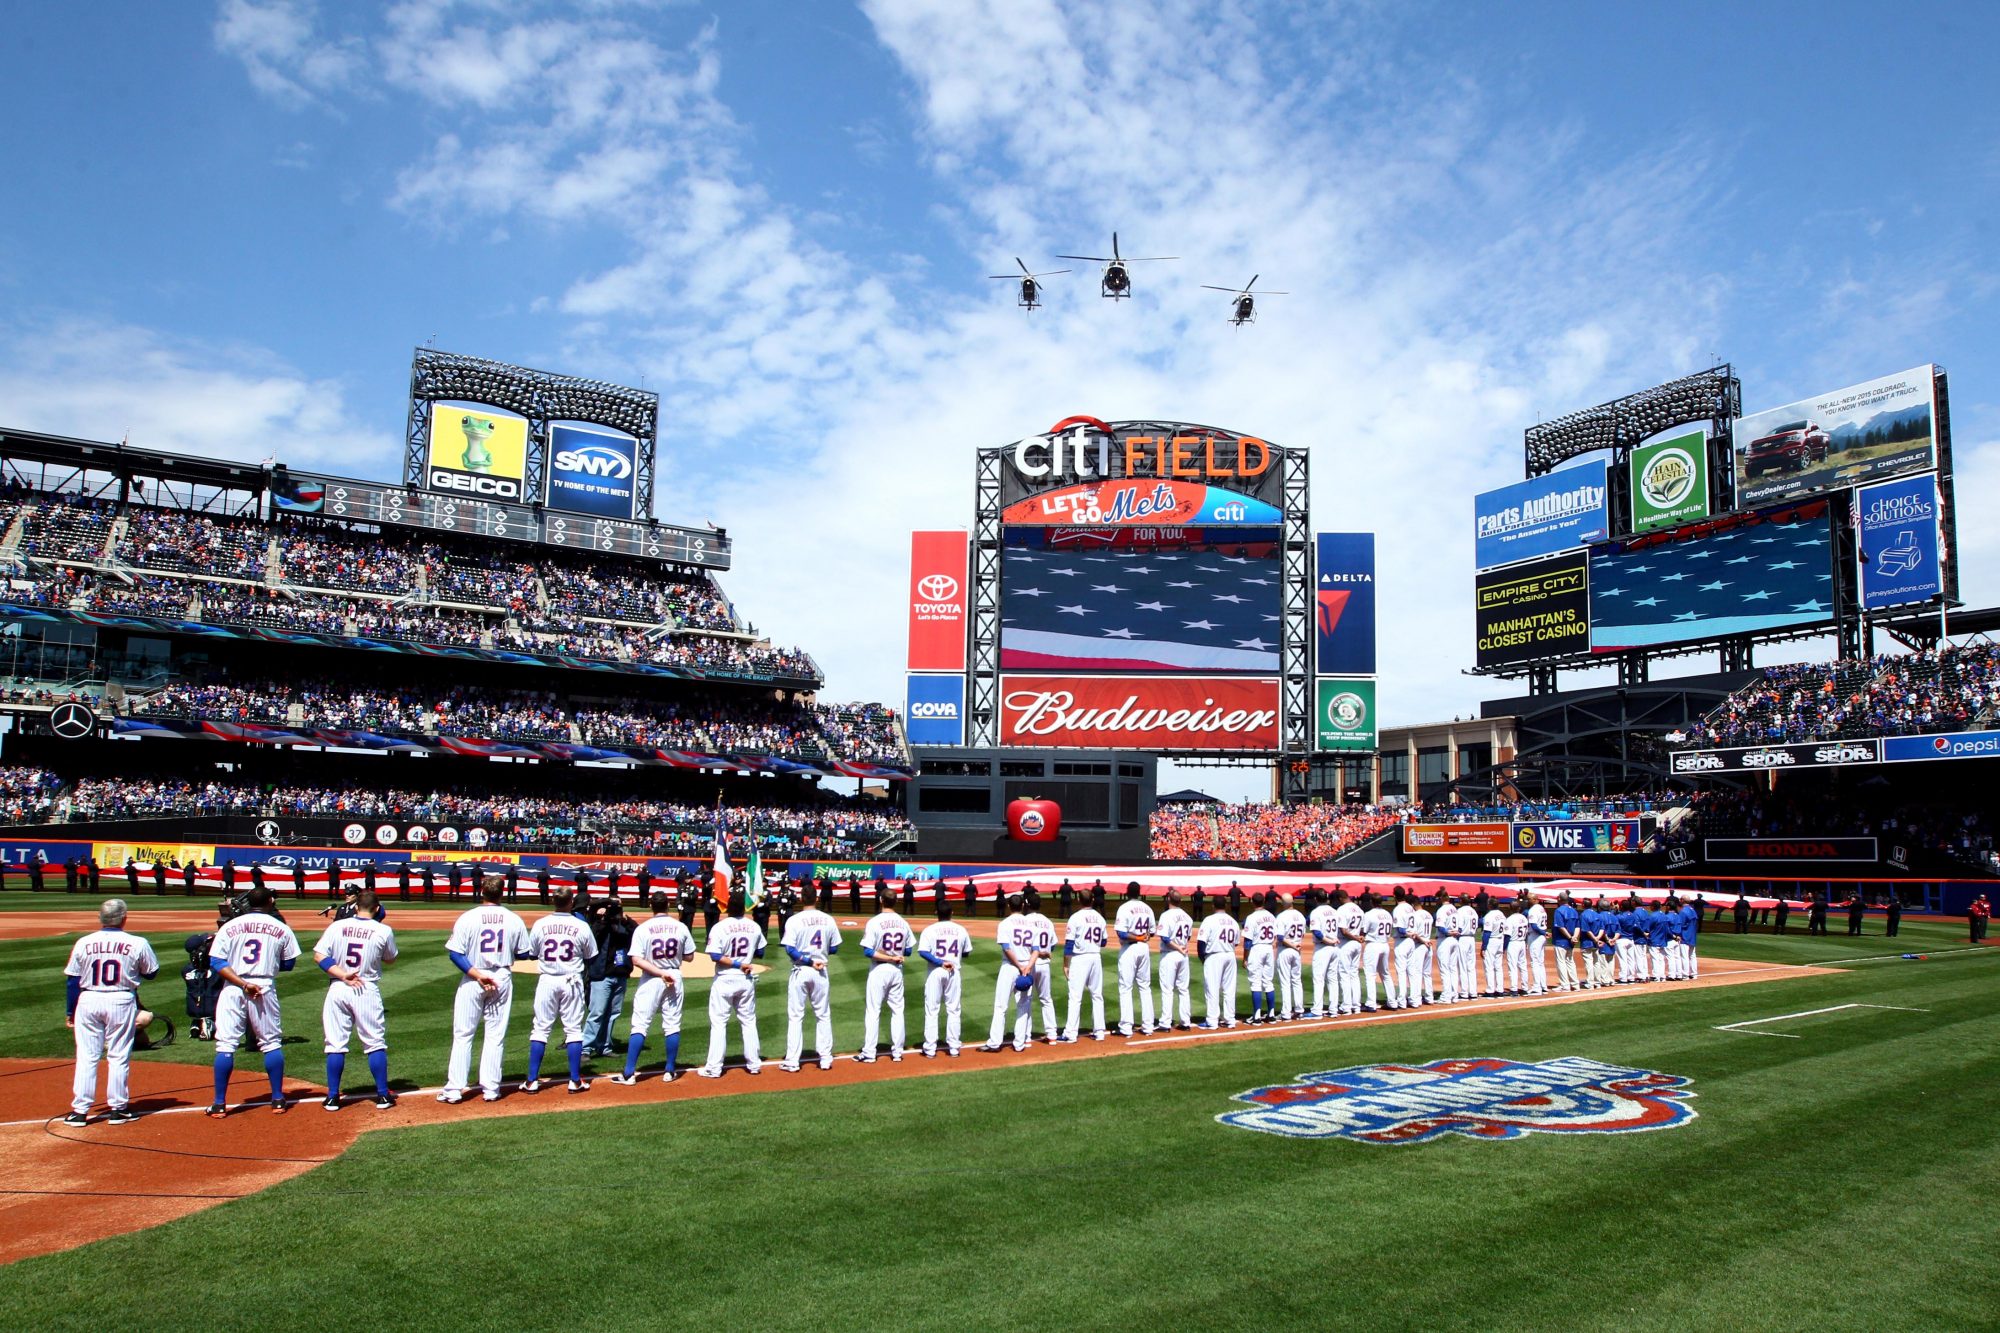 Citi Field hosted the 2013 MLB All Star Game 9 years ago tonight. Were you  there? : r/NewYorkMets